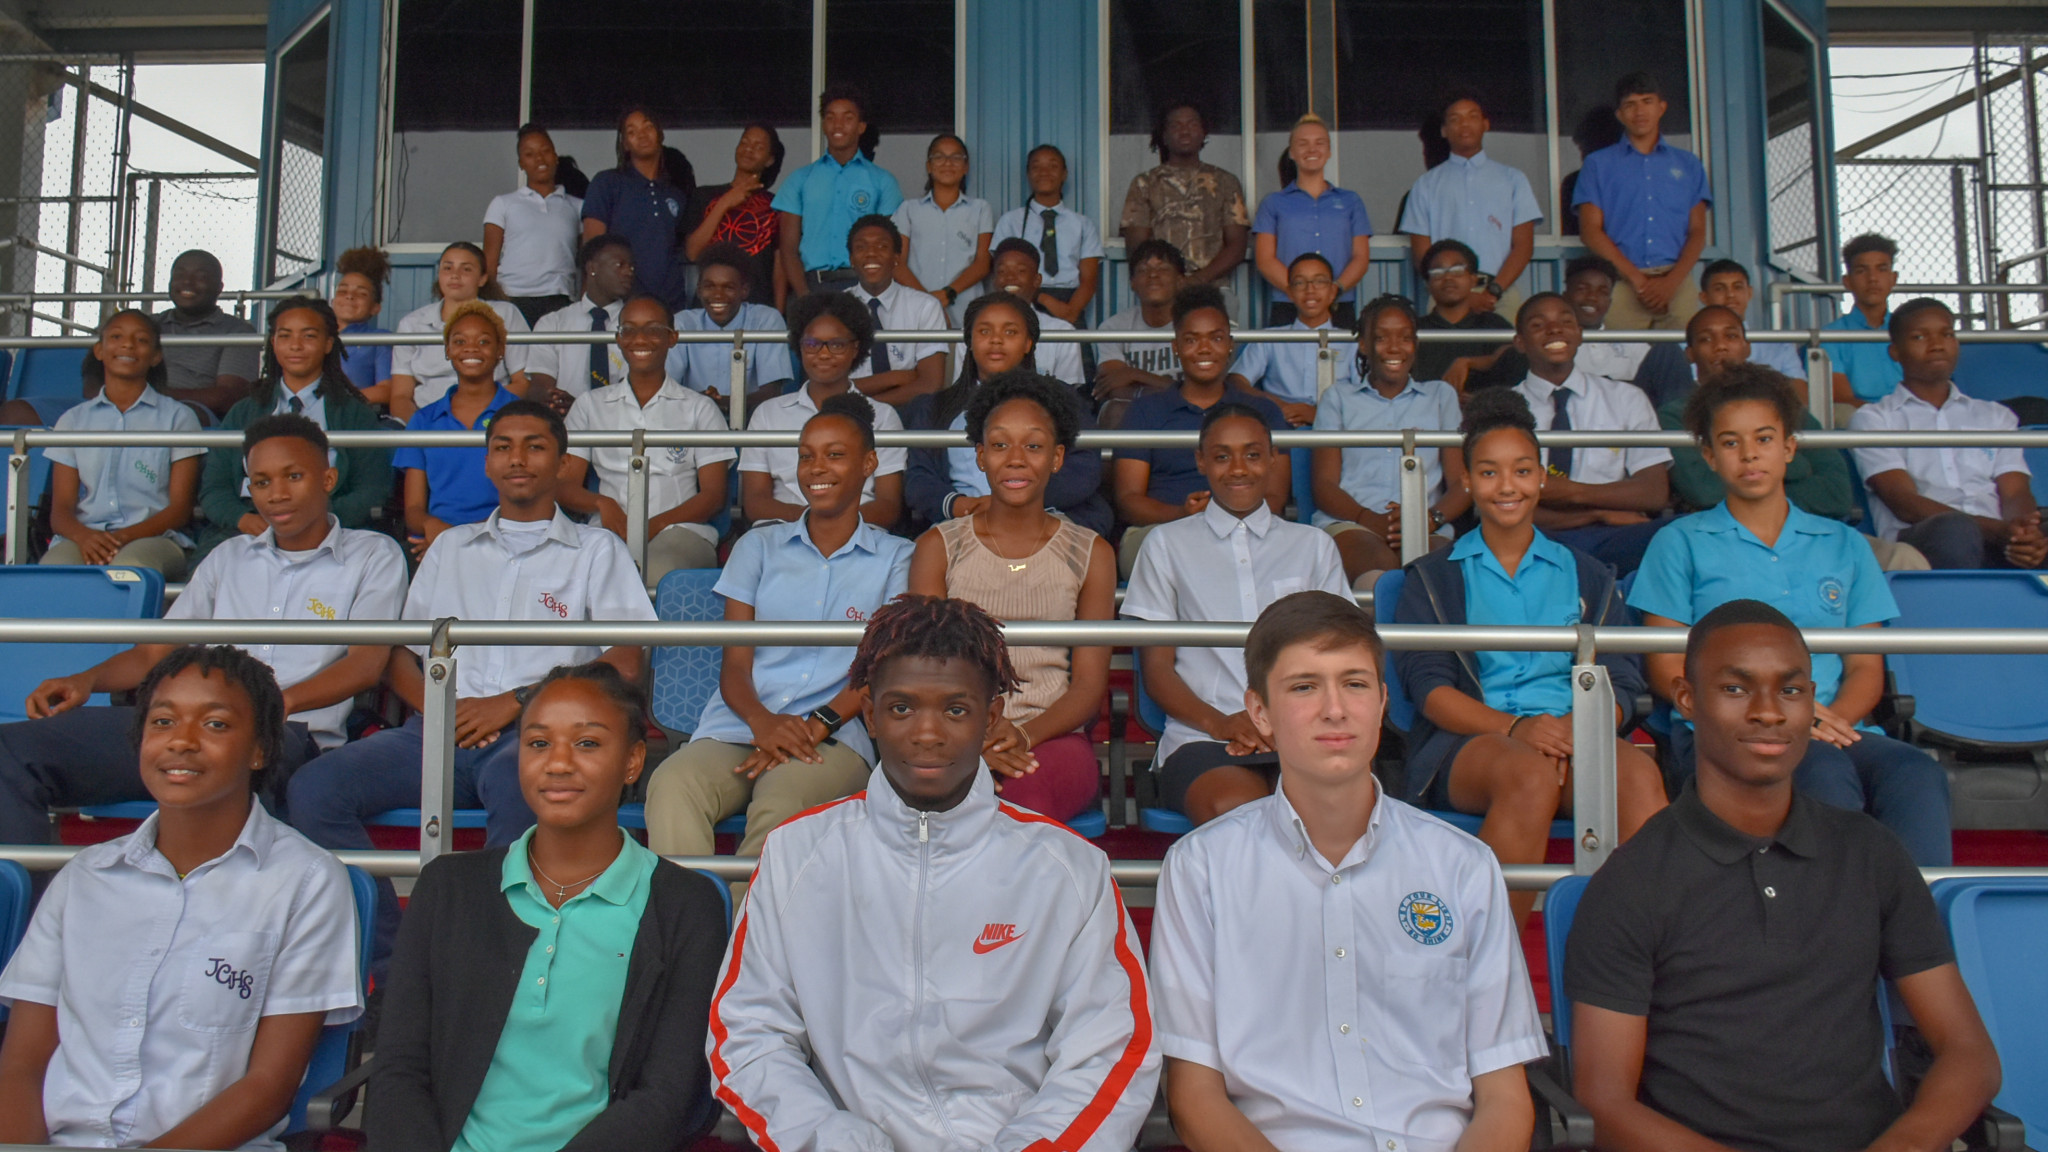 Some 52 athletes are set to represents hosts the Cayman Islands at the 2019 CARIFTA Games ©CARIFTA